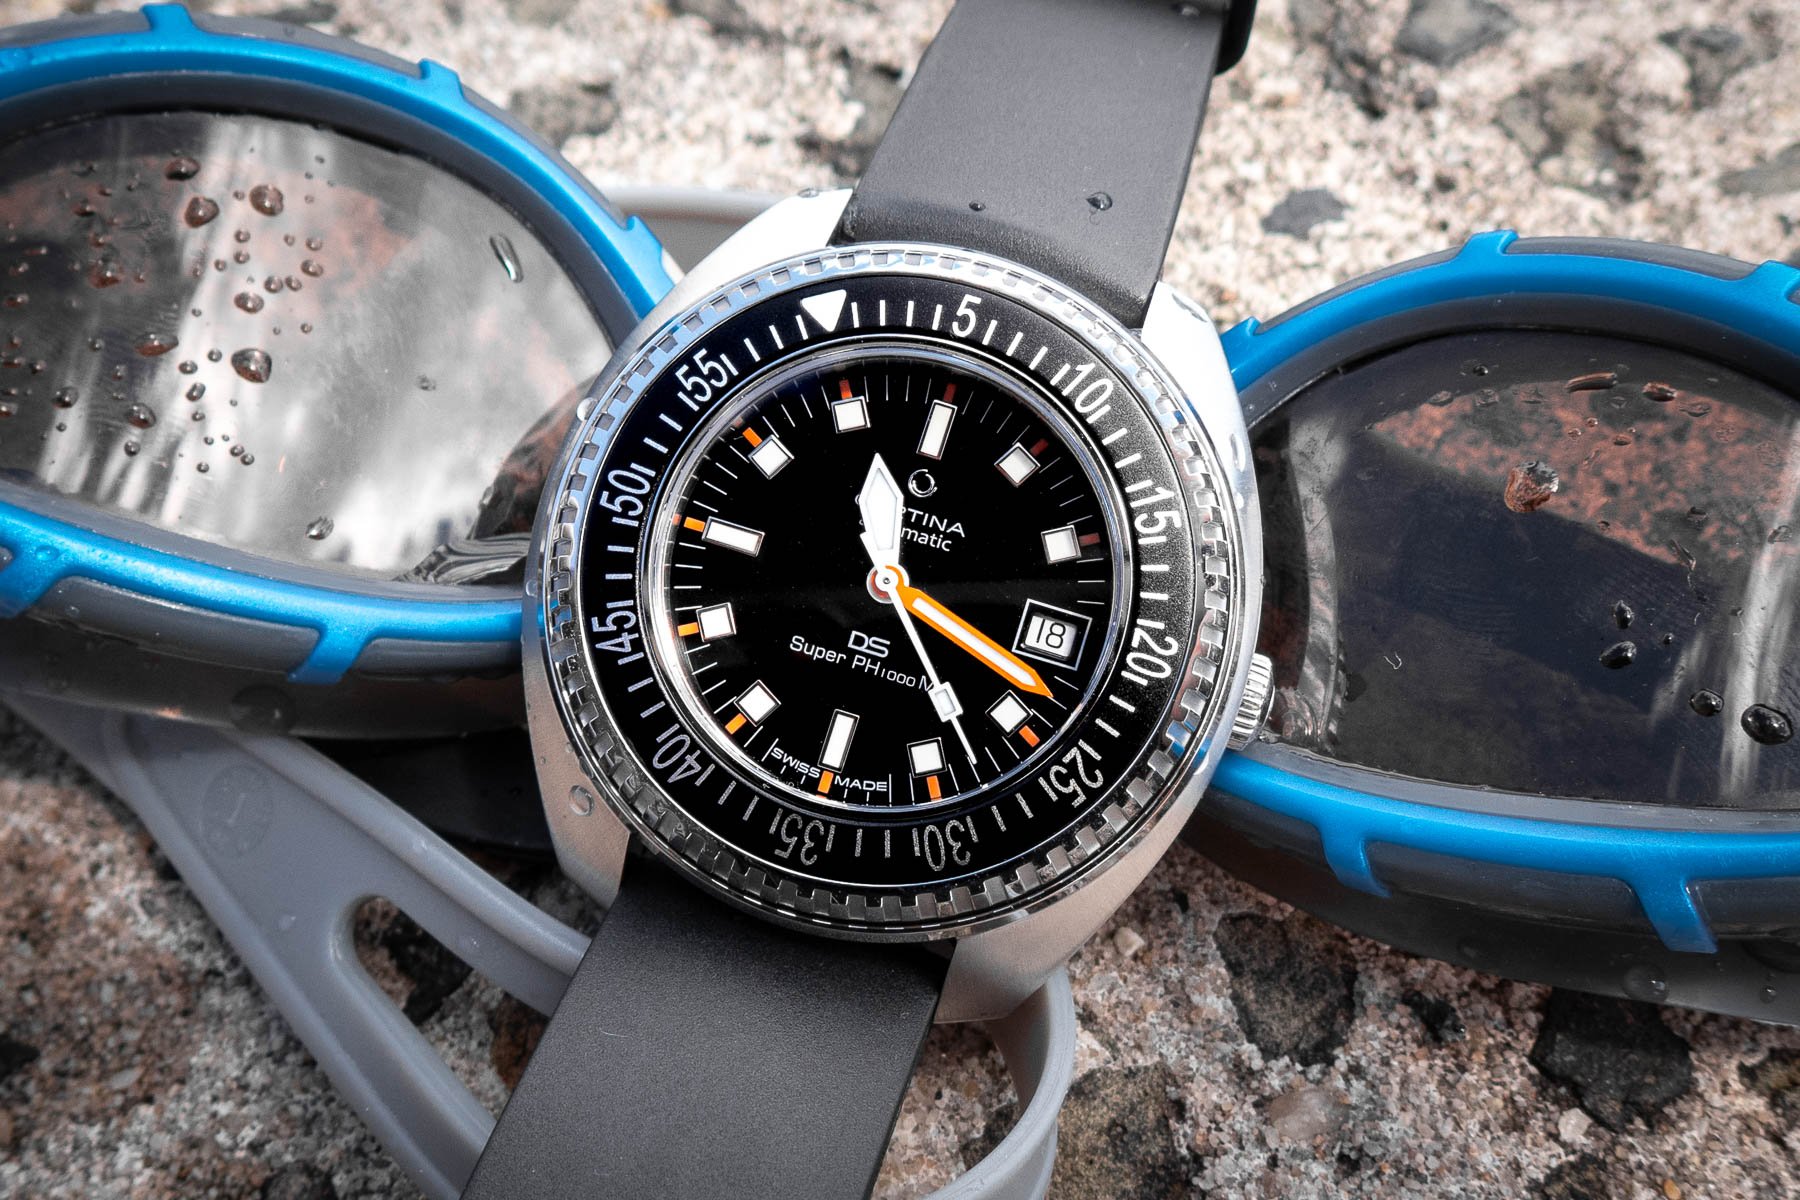 The Certina Watch Issued To The Elite Royal Australian Navy Clearance Divers